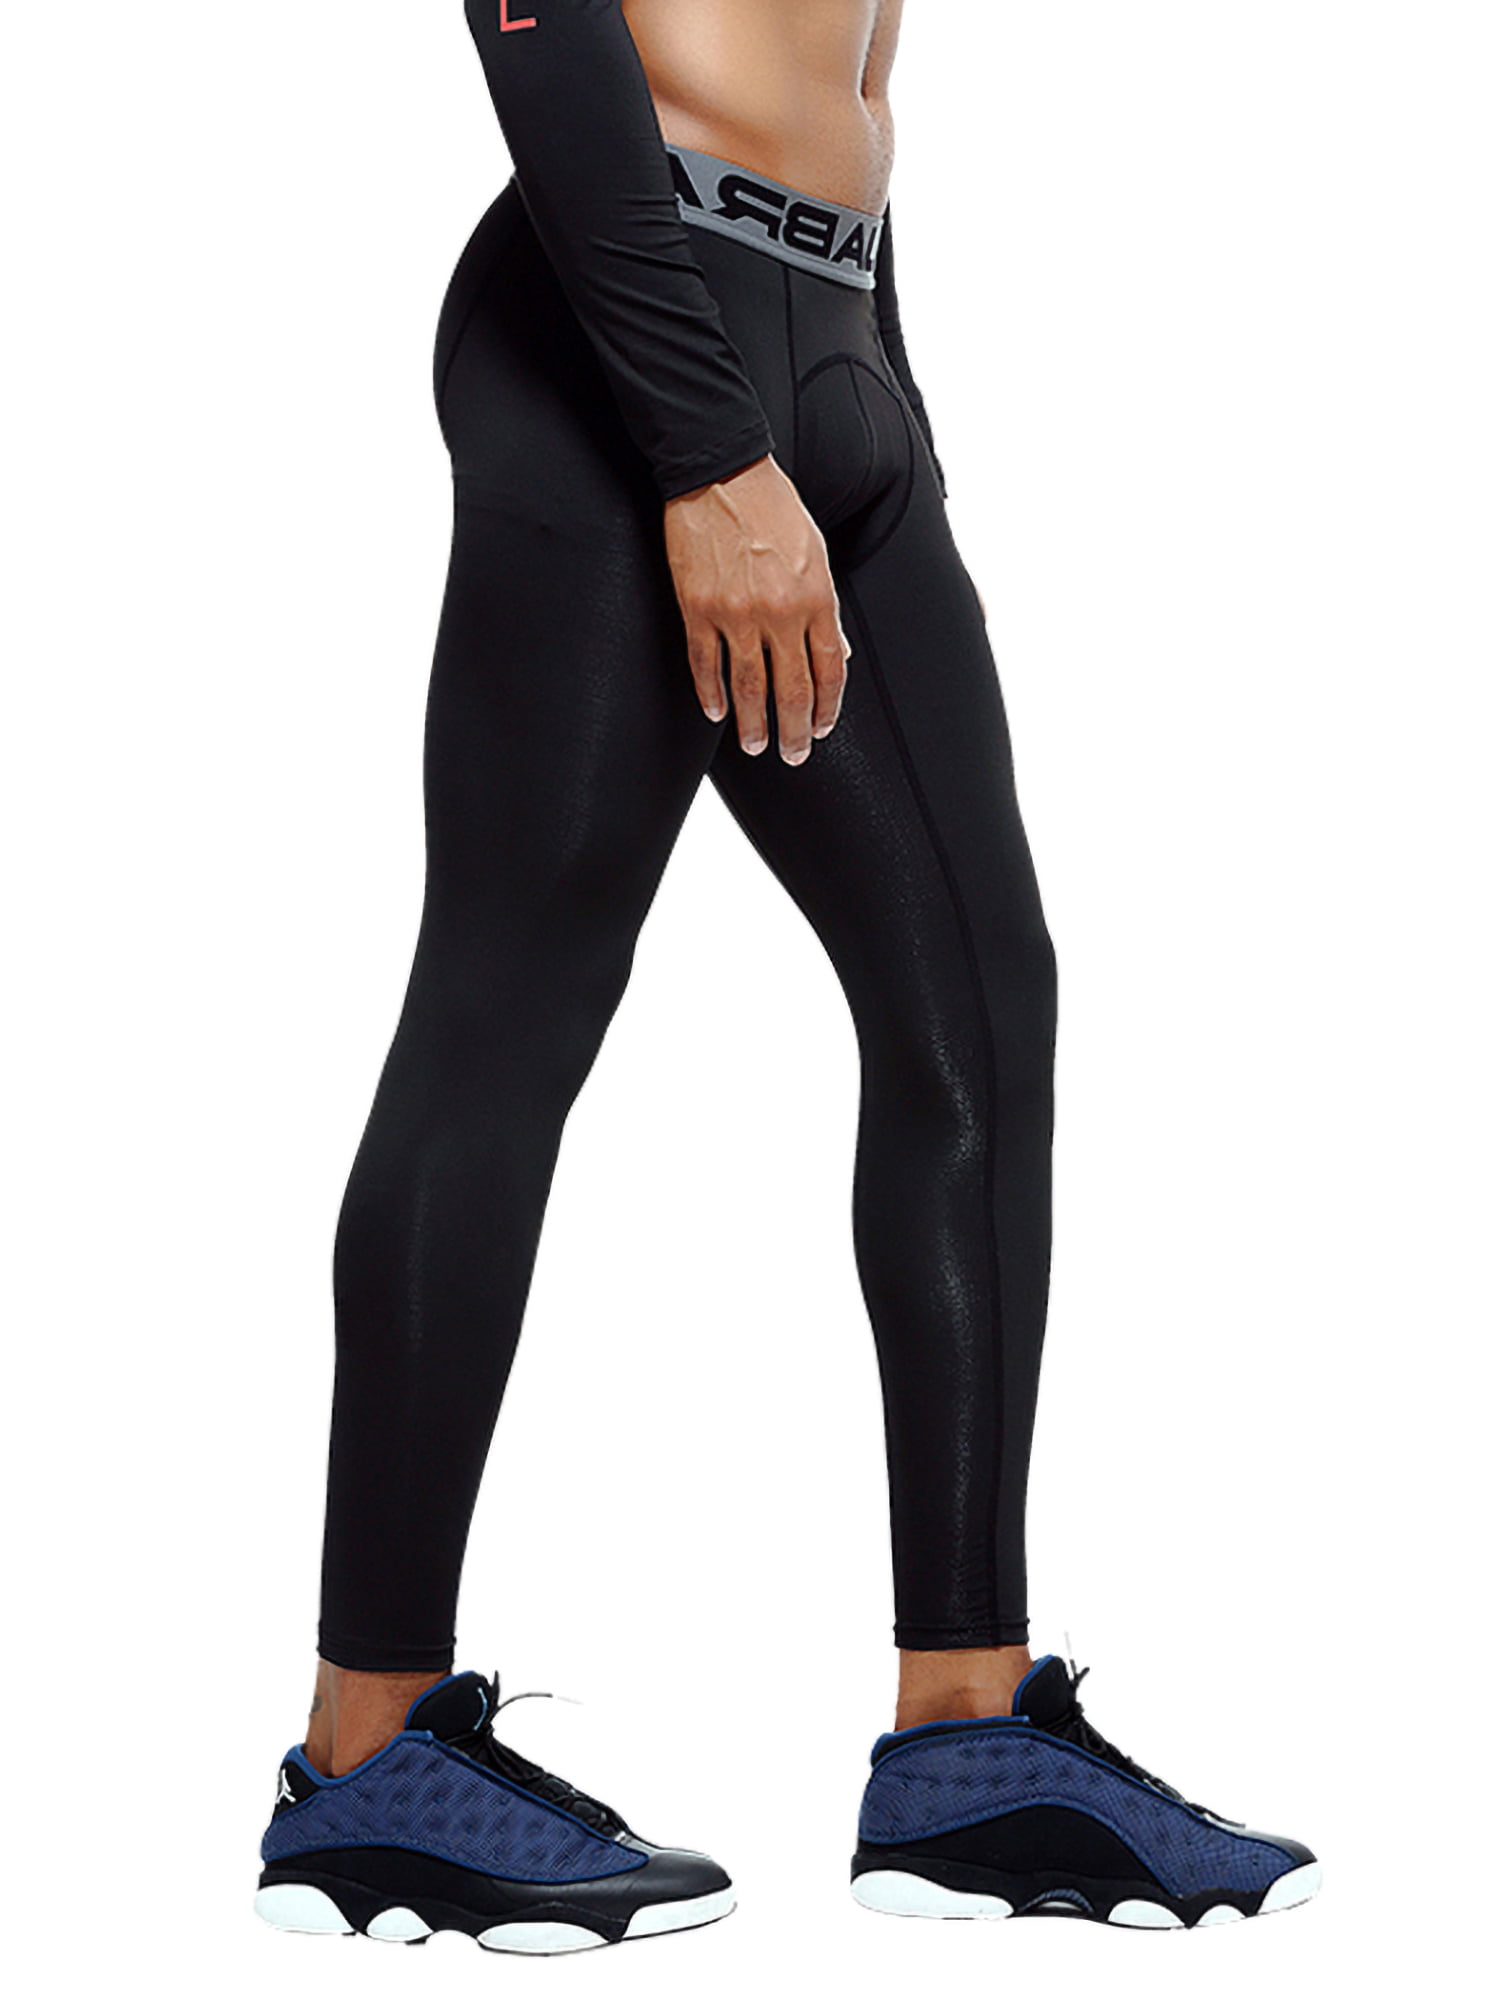 Men's Compression Pants Base Layer Sports Tights Running Capris Workout Training 